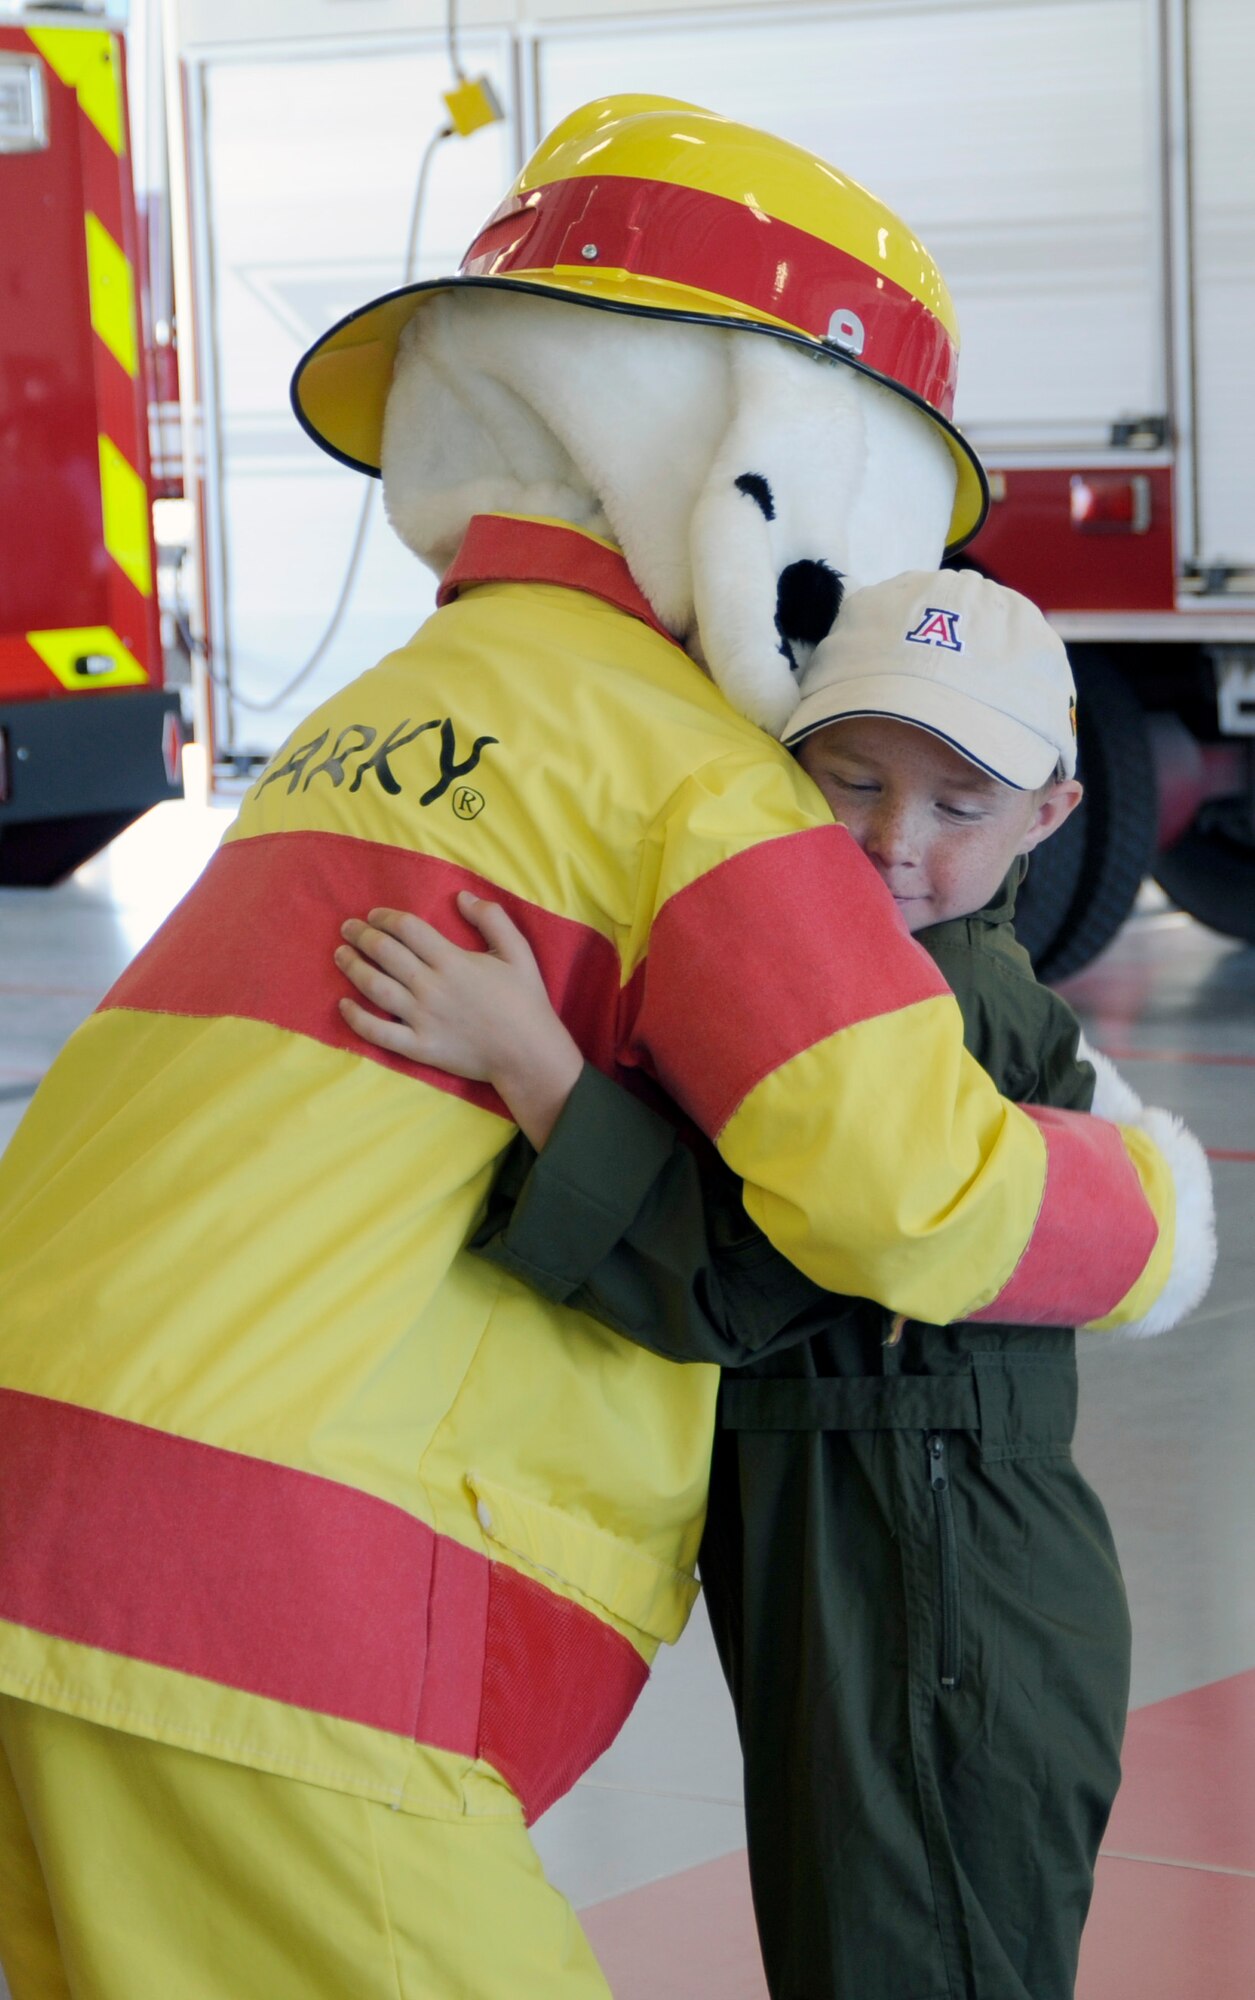 Eight-year-old Larry Ronstadt hugs Sparky the Dog after his tour of the base Fire Department as part of the Pilot for a Day program at Davis-Monthan Air Force Base, Ariz., Oct 25, 2012.  Larry was diagnosed with leukemia in December 2012. The program provides children with a terminal illness a day to visit the base and become an honorary pilot for one of the operational squadrons.  Sparky was played by U.S. Air Force Airman 1st Class James Mullenix, who is a firefighter with the base Fire Department. (U.S. Air Force photo by 1LT Susan Harrington/released)